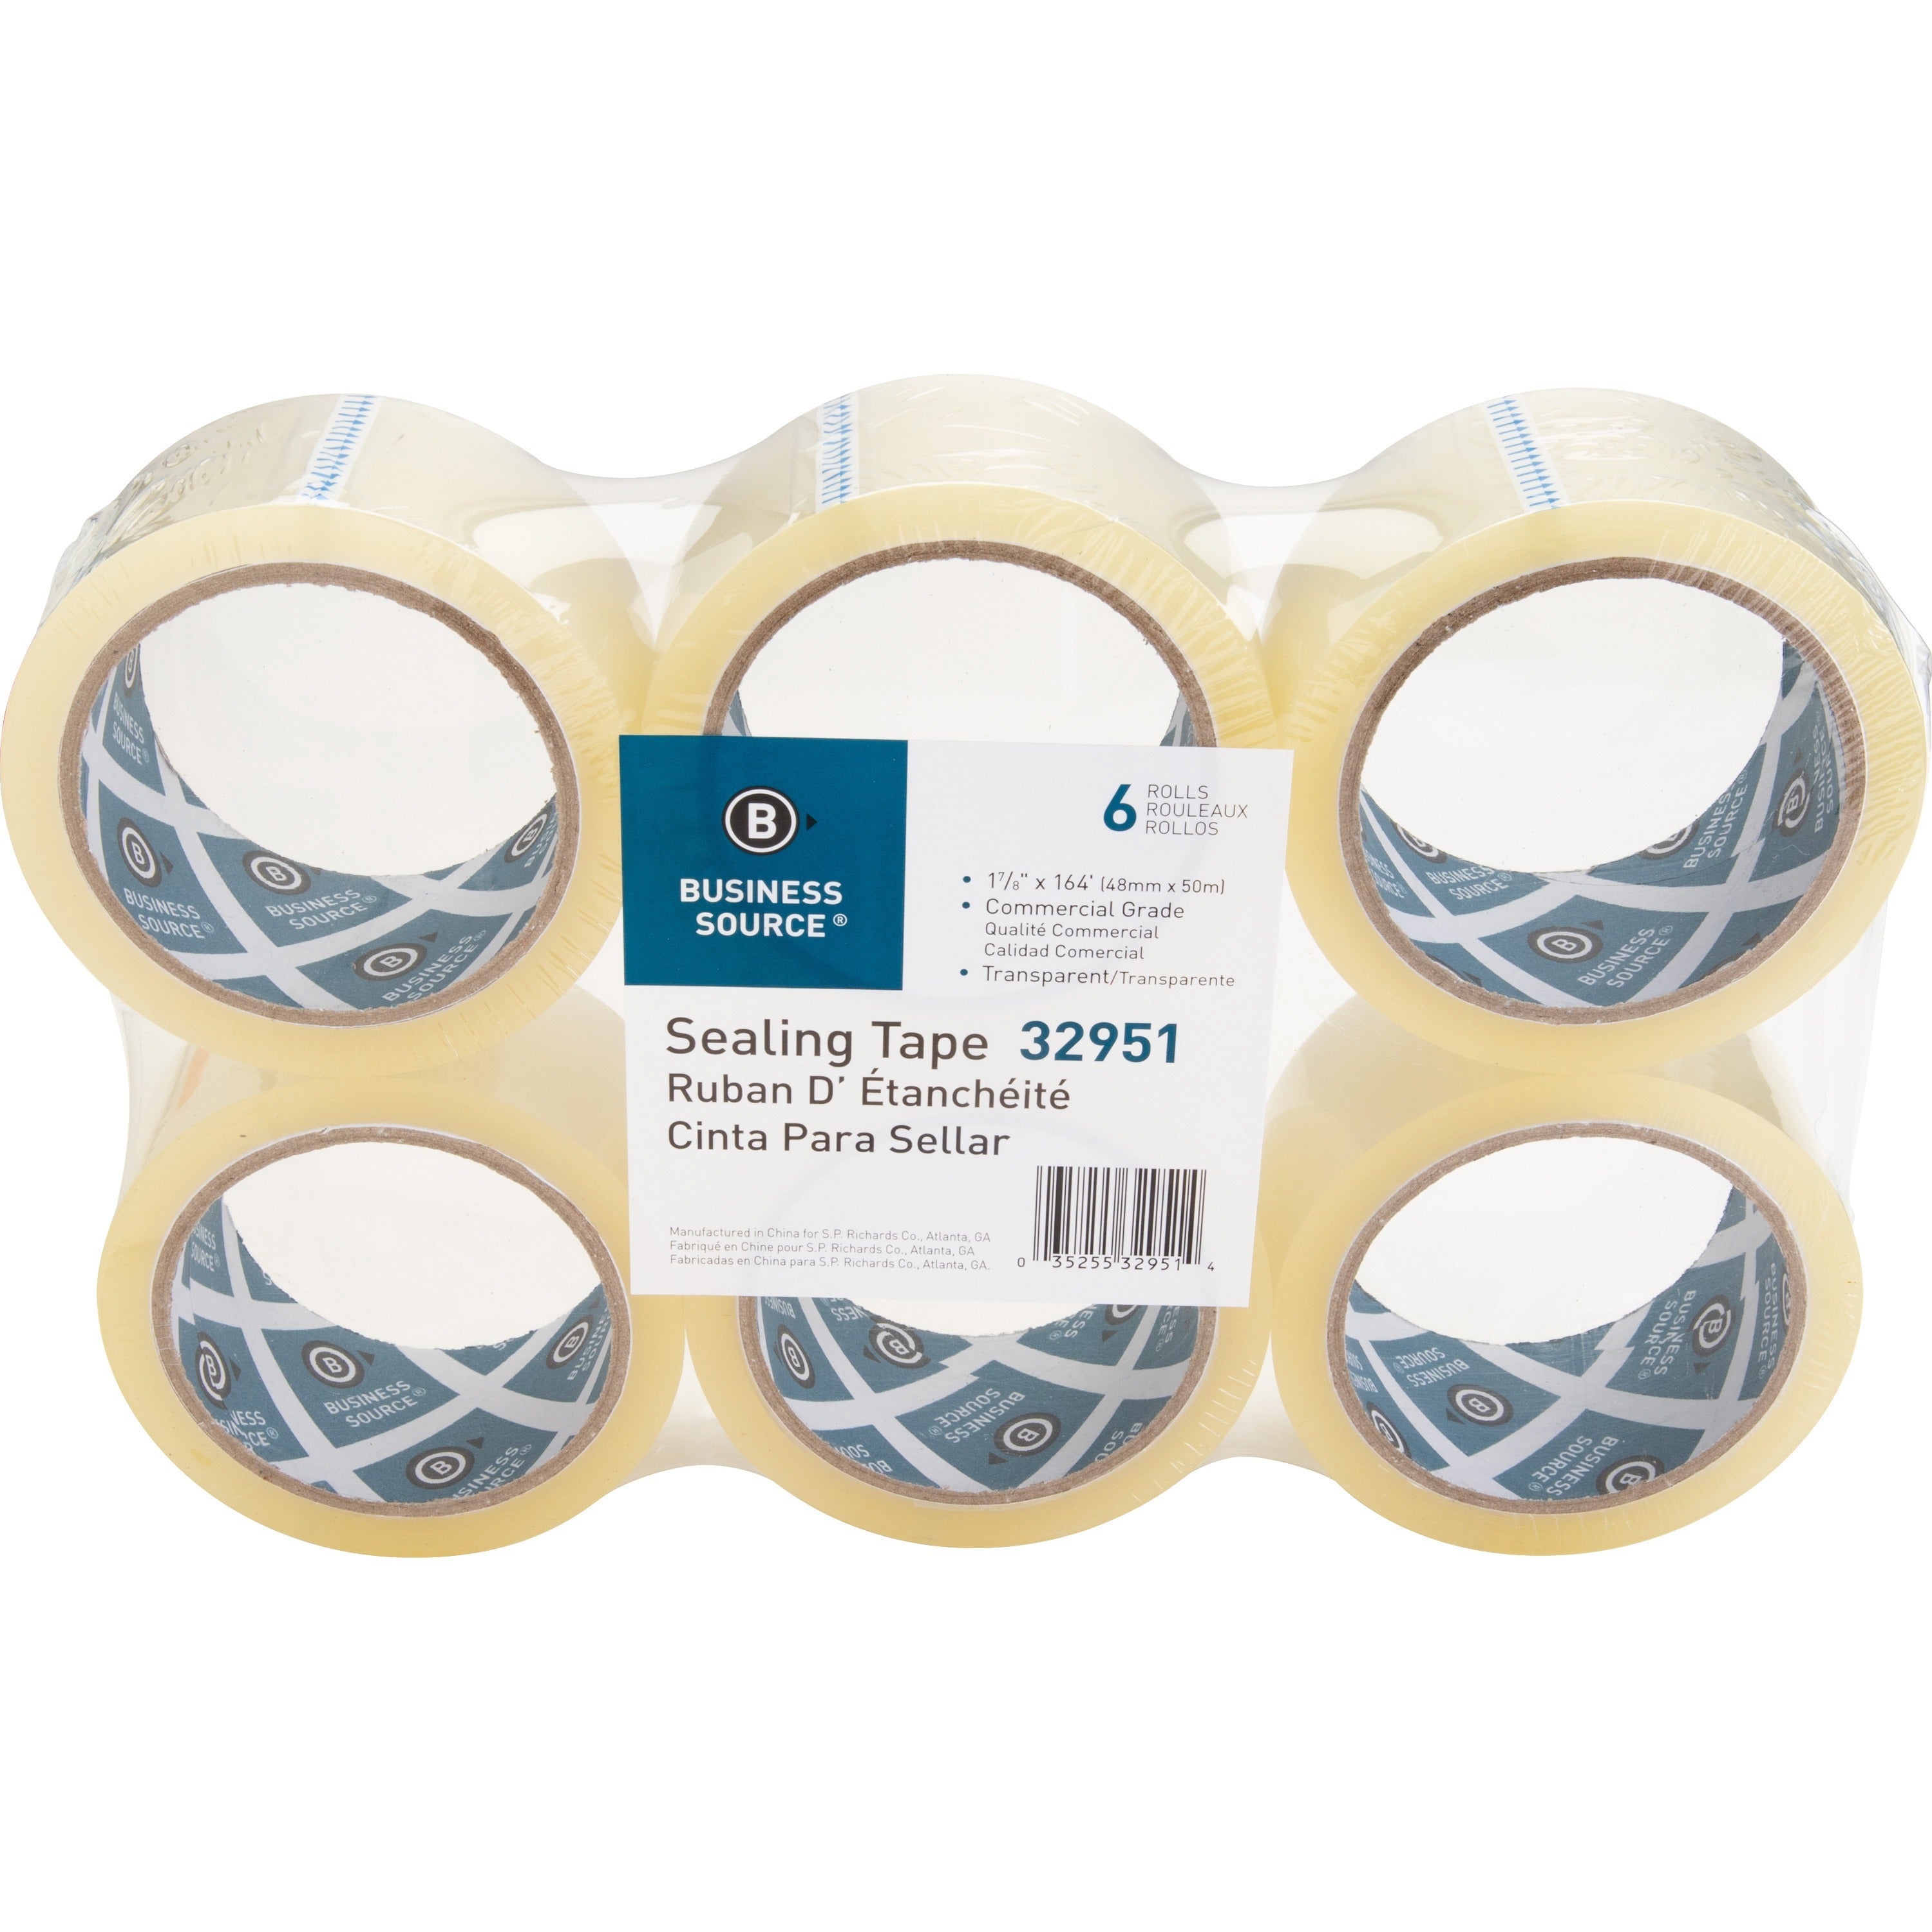 Business Source 3" Core Sealing Tape - 55 yd Length x 1.88" Width - 3" Core - Pressure-sensitive Poly - 2 mil - Adhesive Backing - Abrasion Resistant, Moisture Resistant, Split Resistant - For Packing, Sealing - 6 / Pack - Clear - 